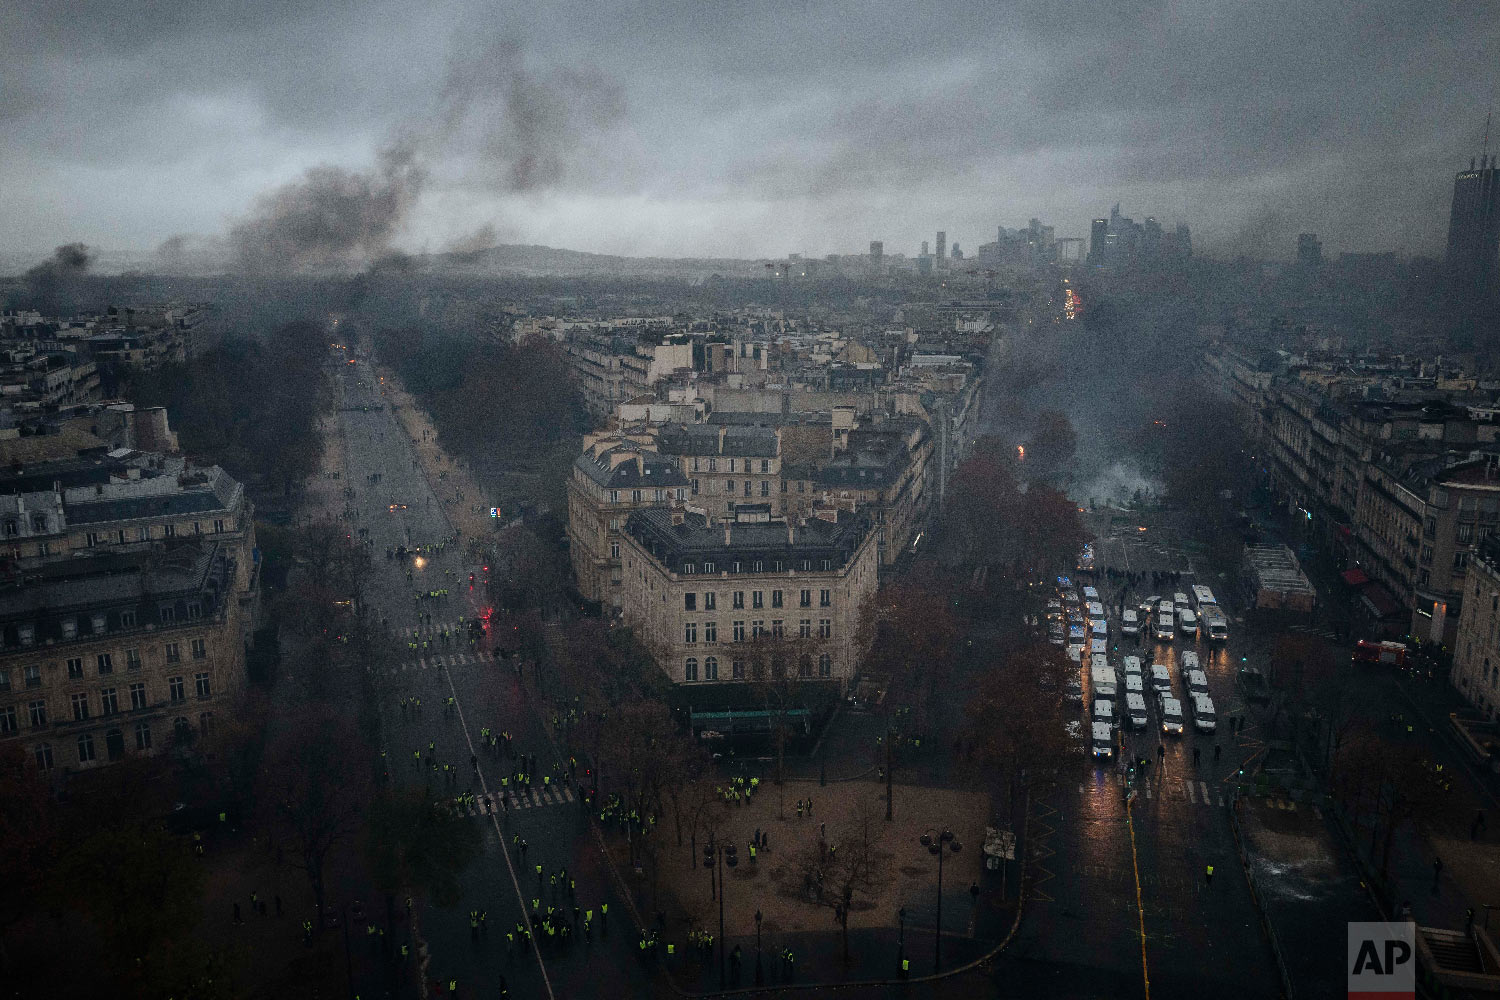  Avenues leading to the Arc de Triomphe are pictured from the top of the Arc de Triomphe on the Champs-Elysees avenue during a demonstration in Paris on Dec. 1, 2018. (AP Photo/Kamil Zihnioglu) 